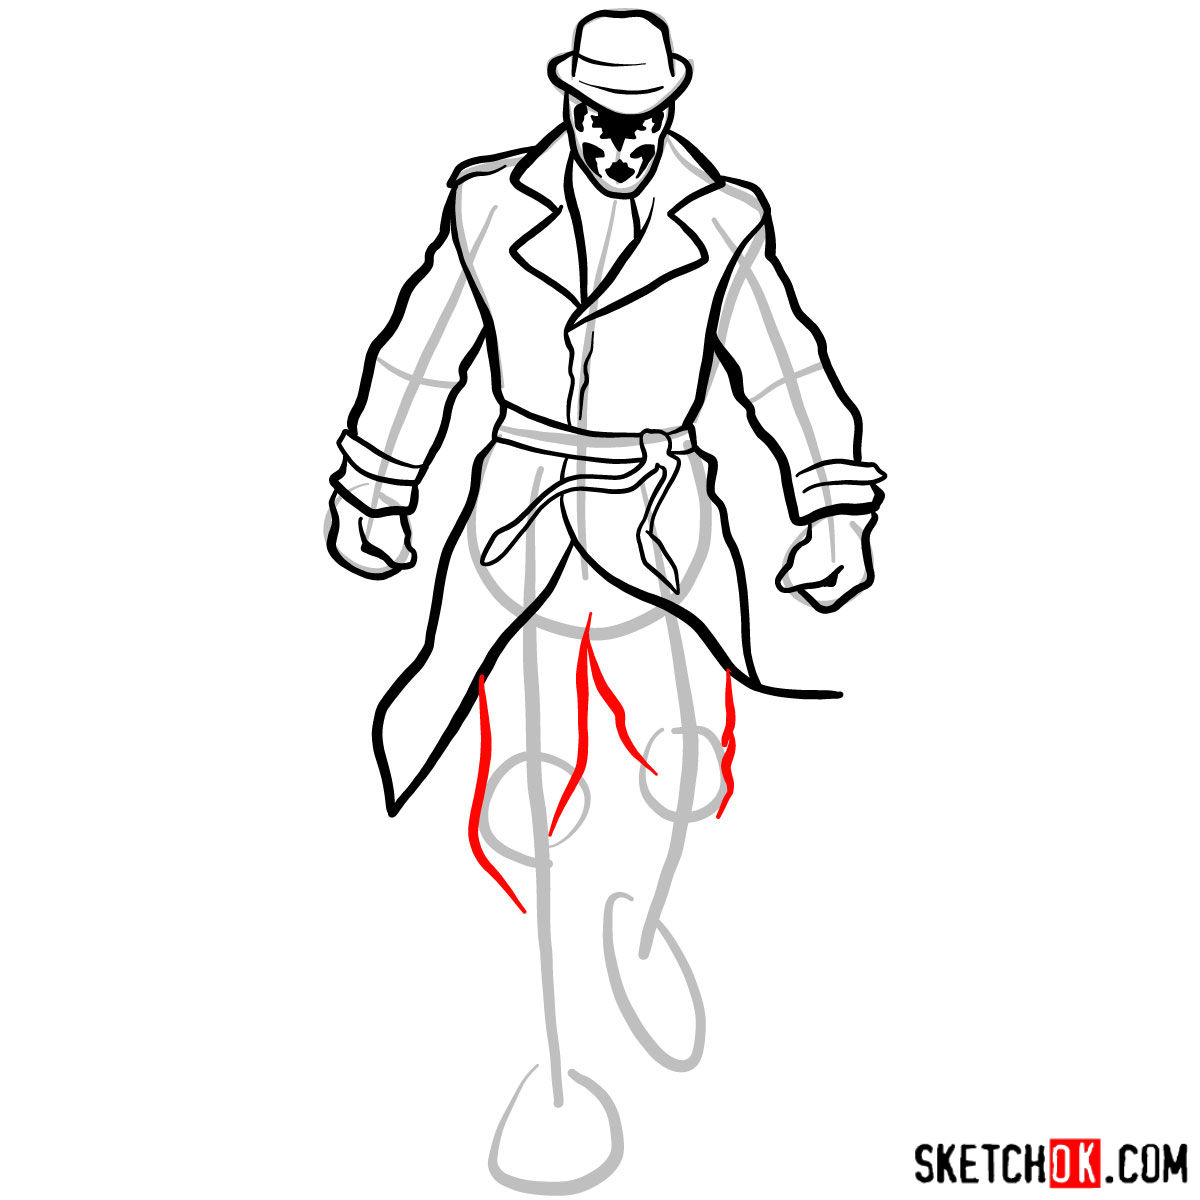 How to draw Rorschach from Watchmen - step 09